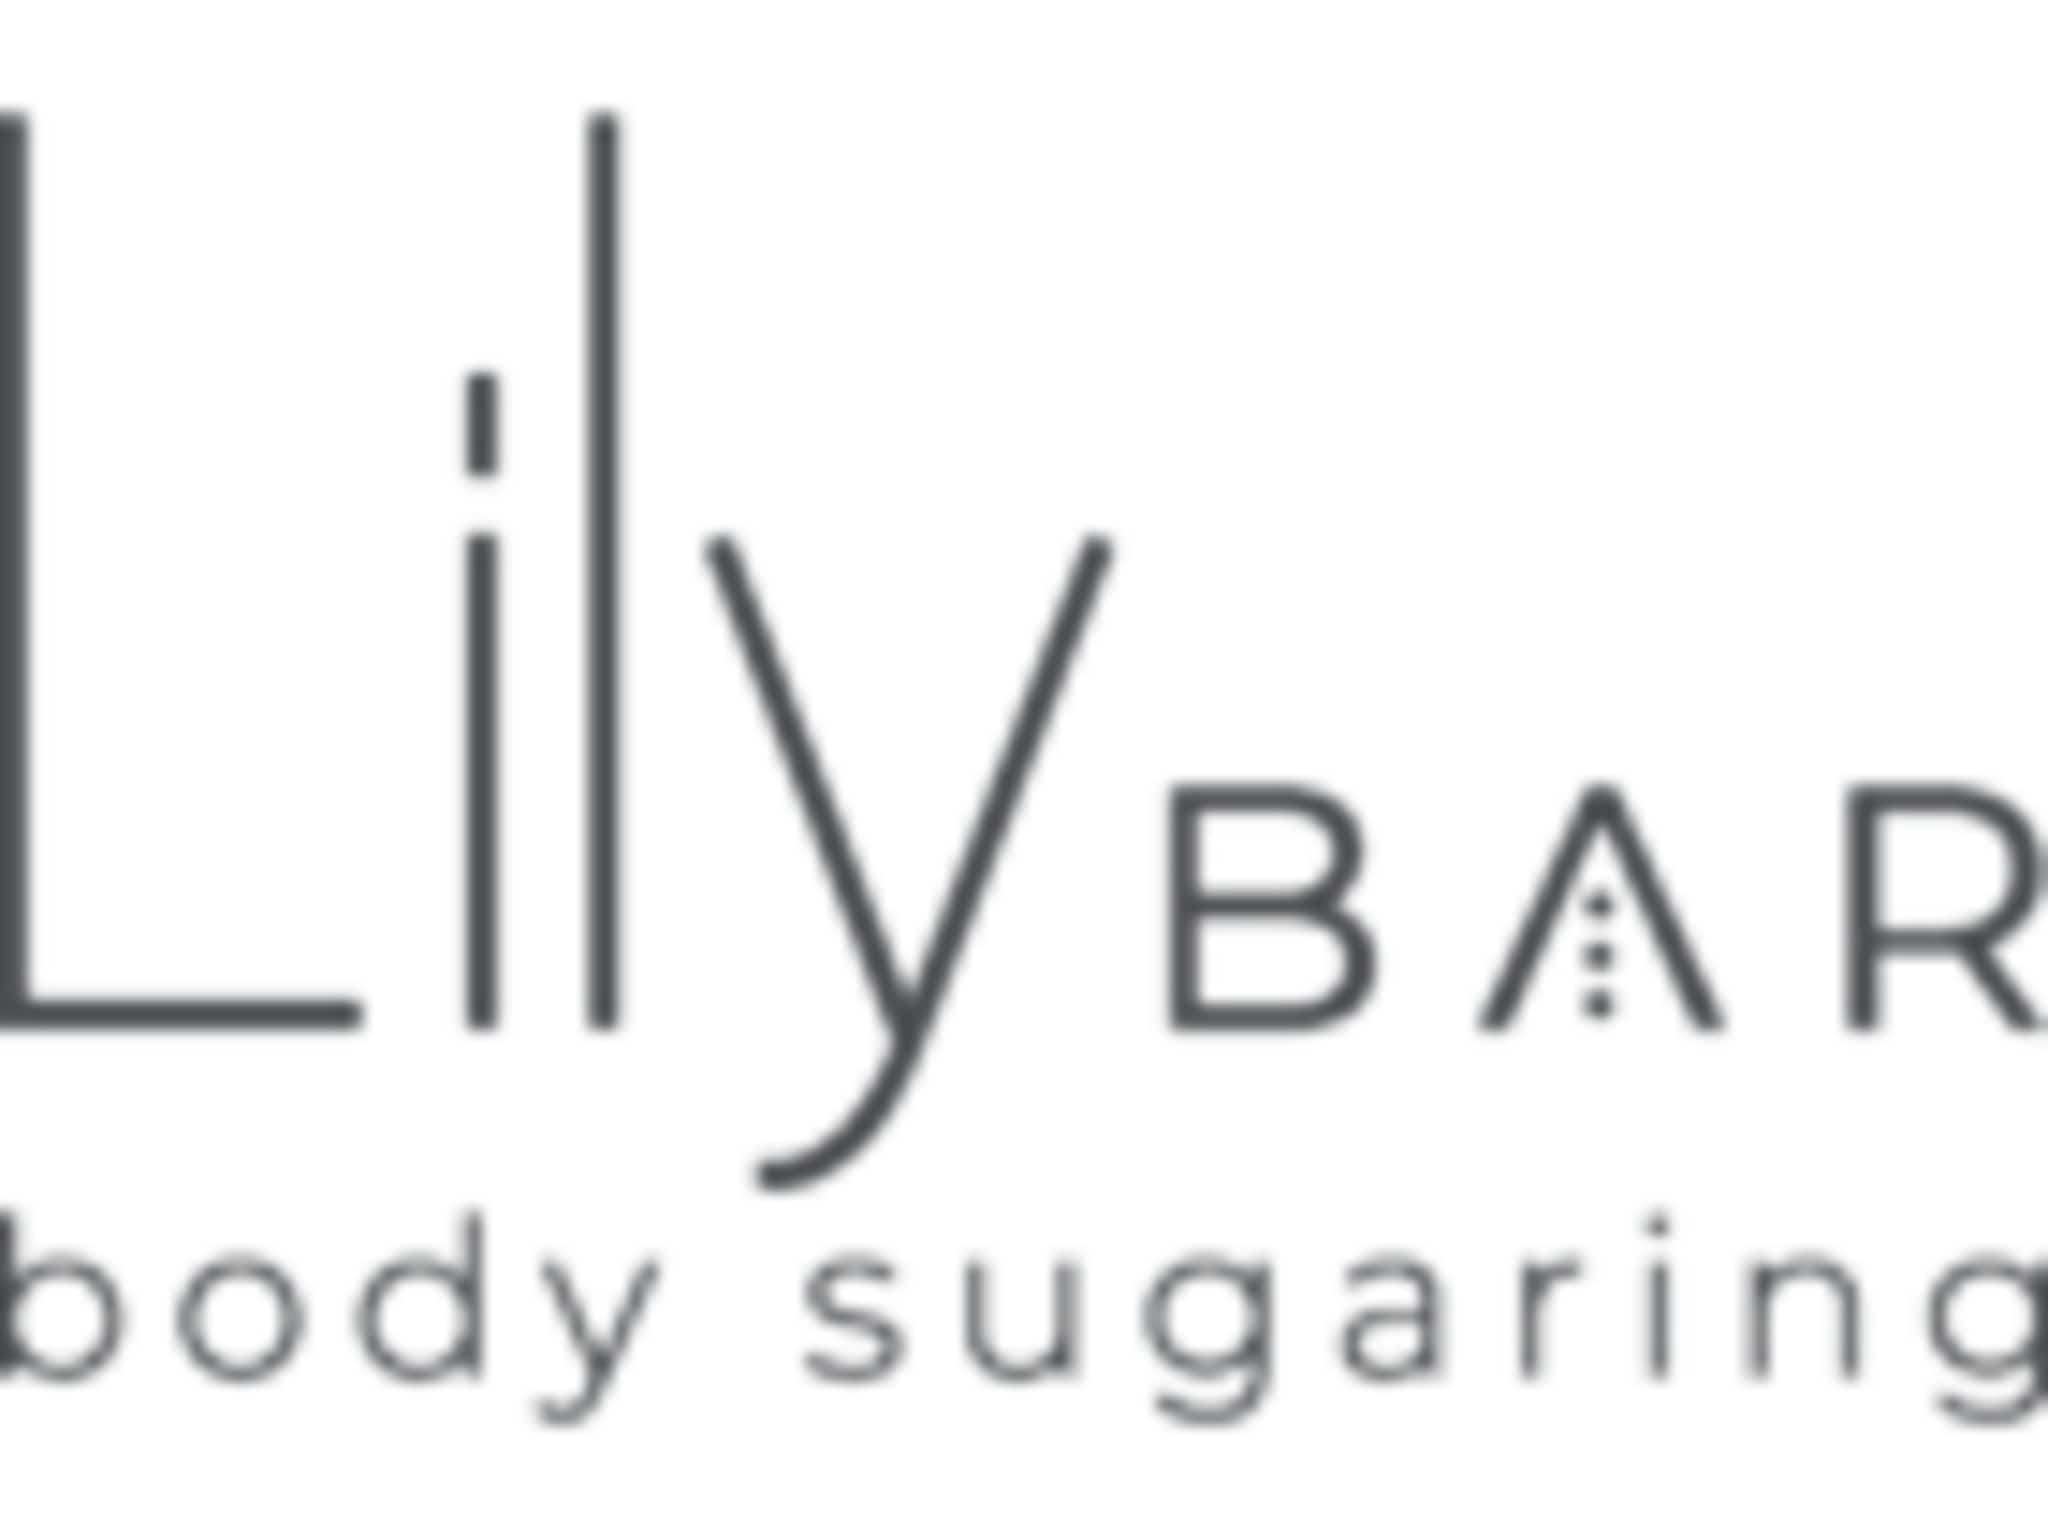 photo Lily Bar Body Sugaring Inc The